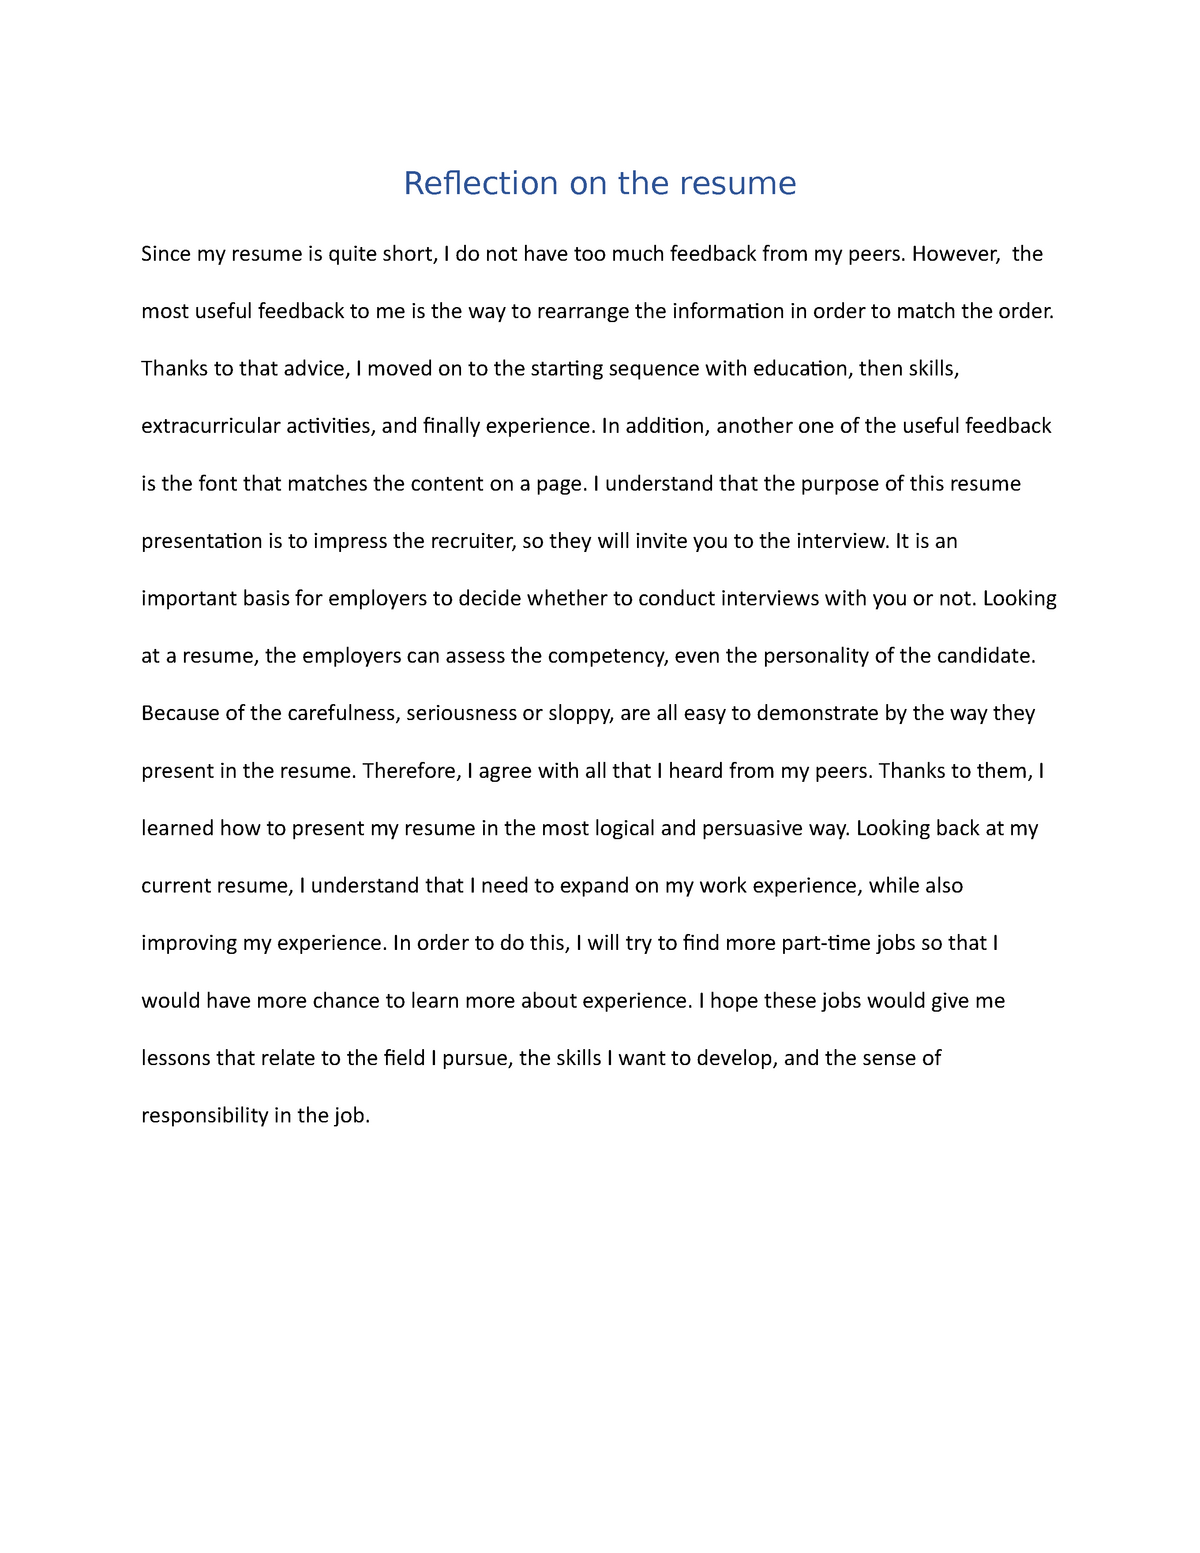 reflection paper about writing a resume